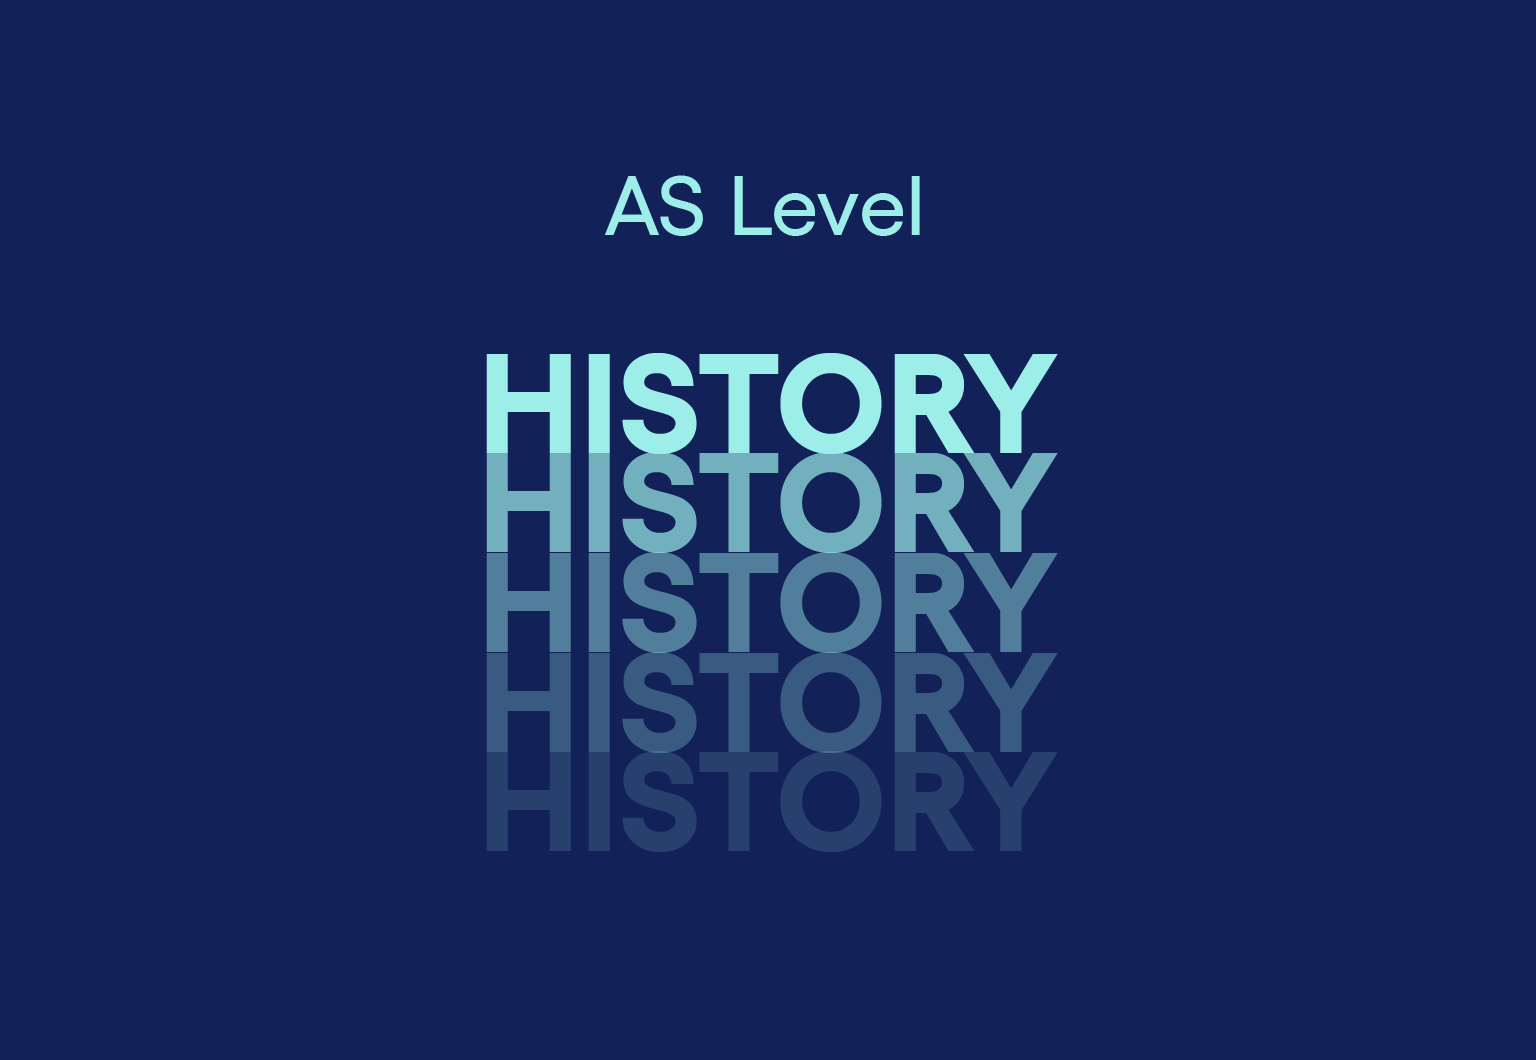 AS Level History